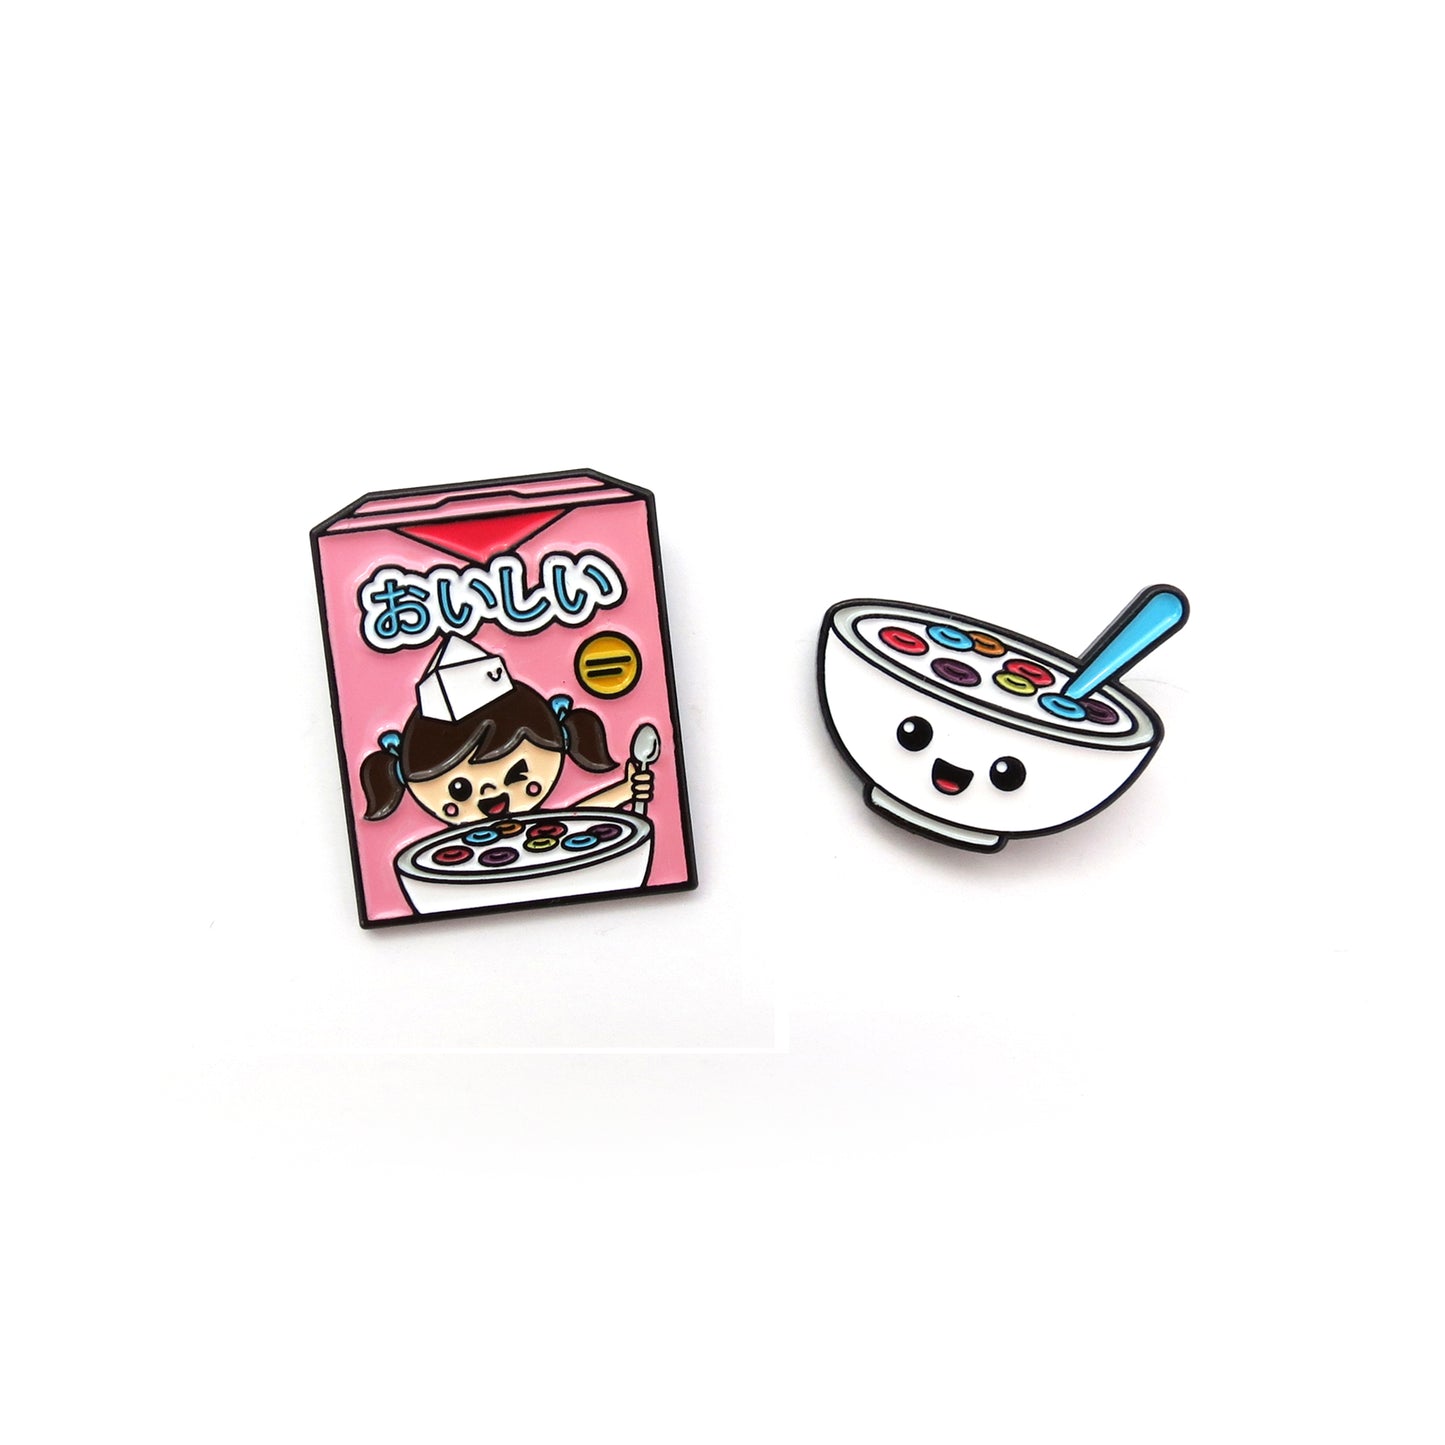 Fruity Cereal Box and Cereal Bowl enamel pins on white background